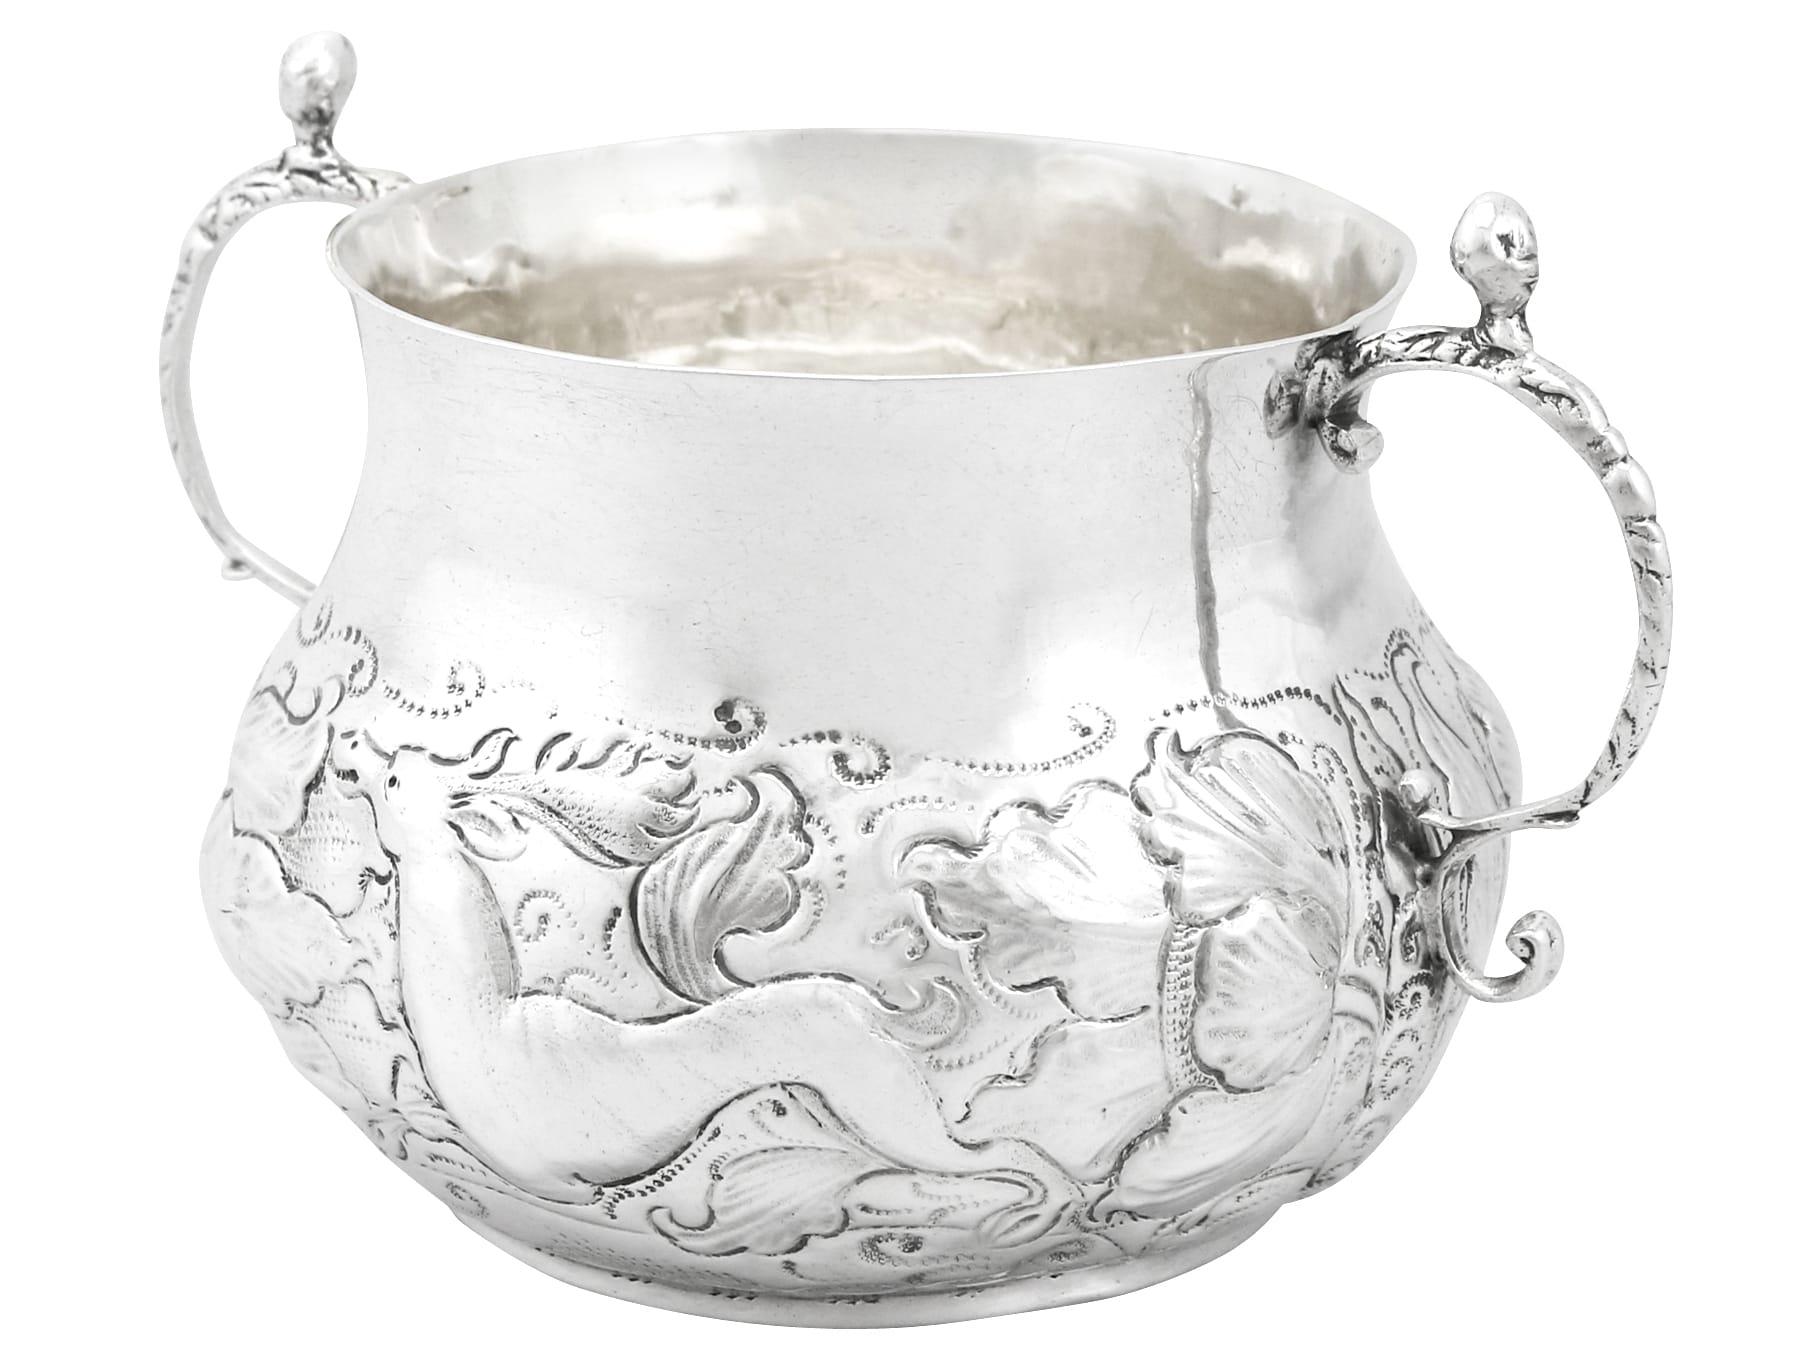 An exceptional, fine and impressive antique Charles II English sterling silver porringer; part of our collectable silverware collection.

This exceptional antique Charles II sterling silver porringer has a circular rounded form onto a collet